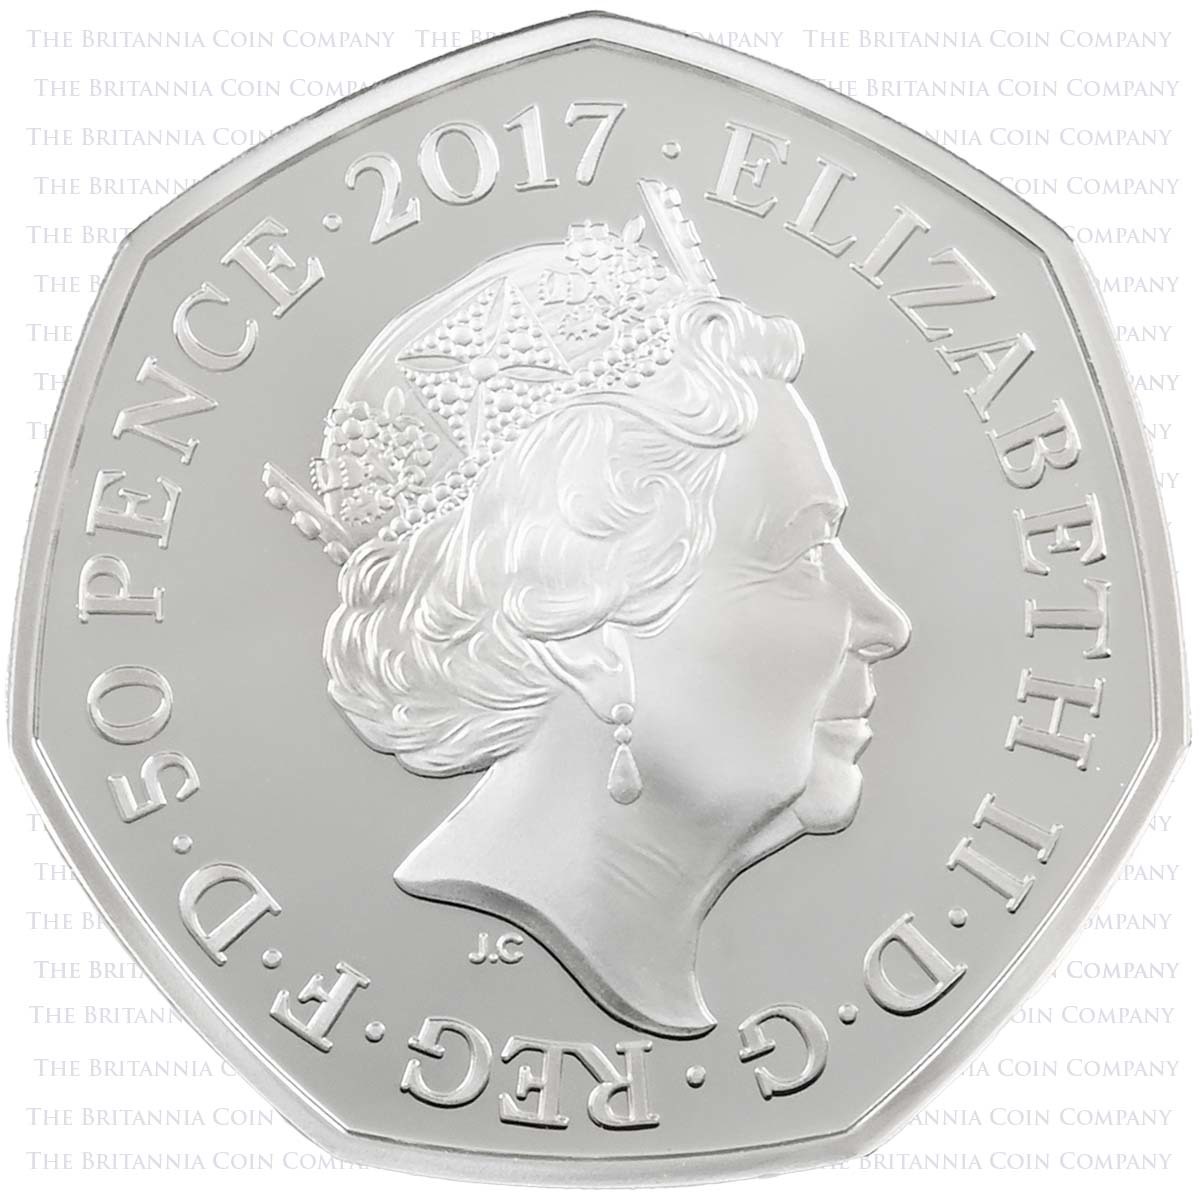 UK17JFSP 2017 Beatrix Potter Mr Jeremy Fisher Fifty Pence Colour Printed Silver Proof Coin Obverse